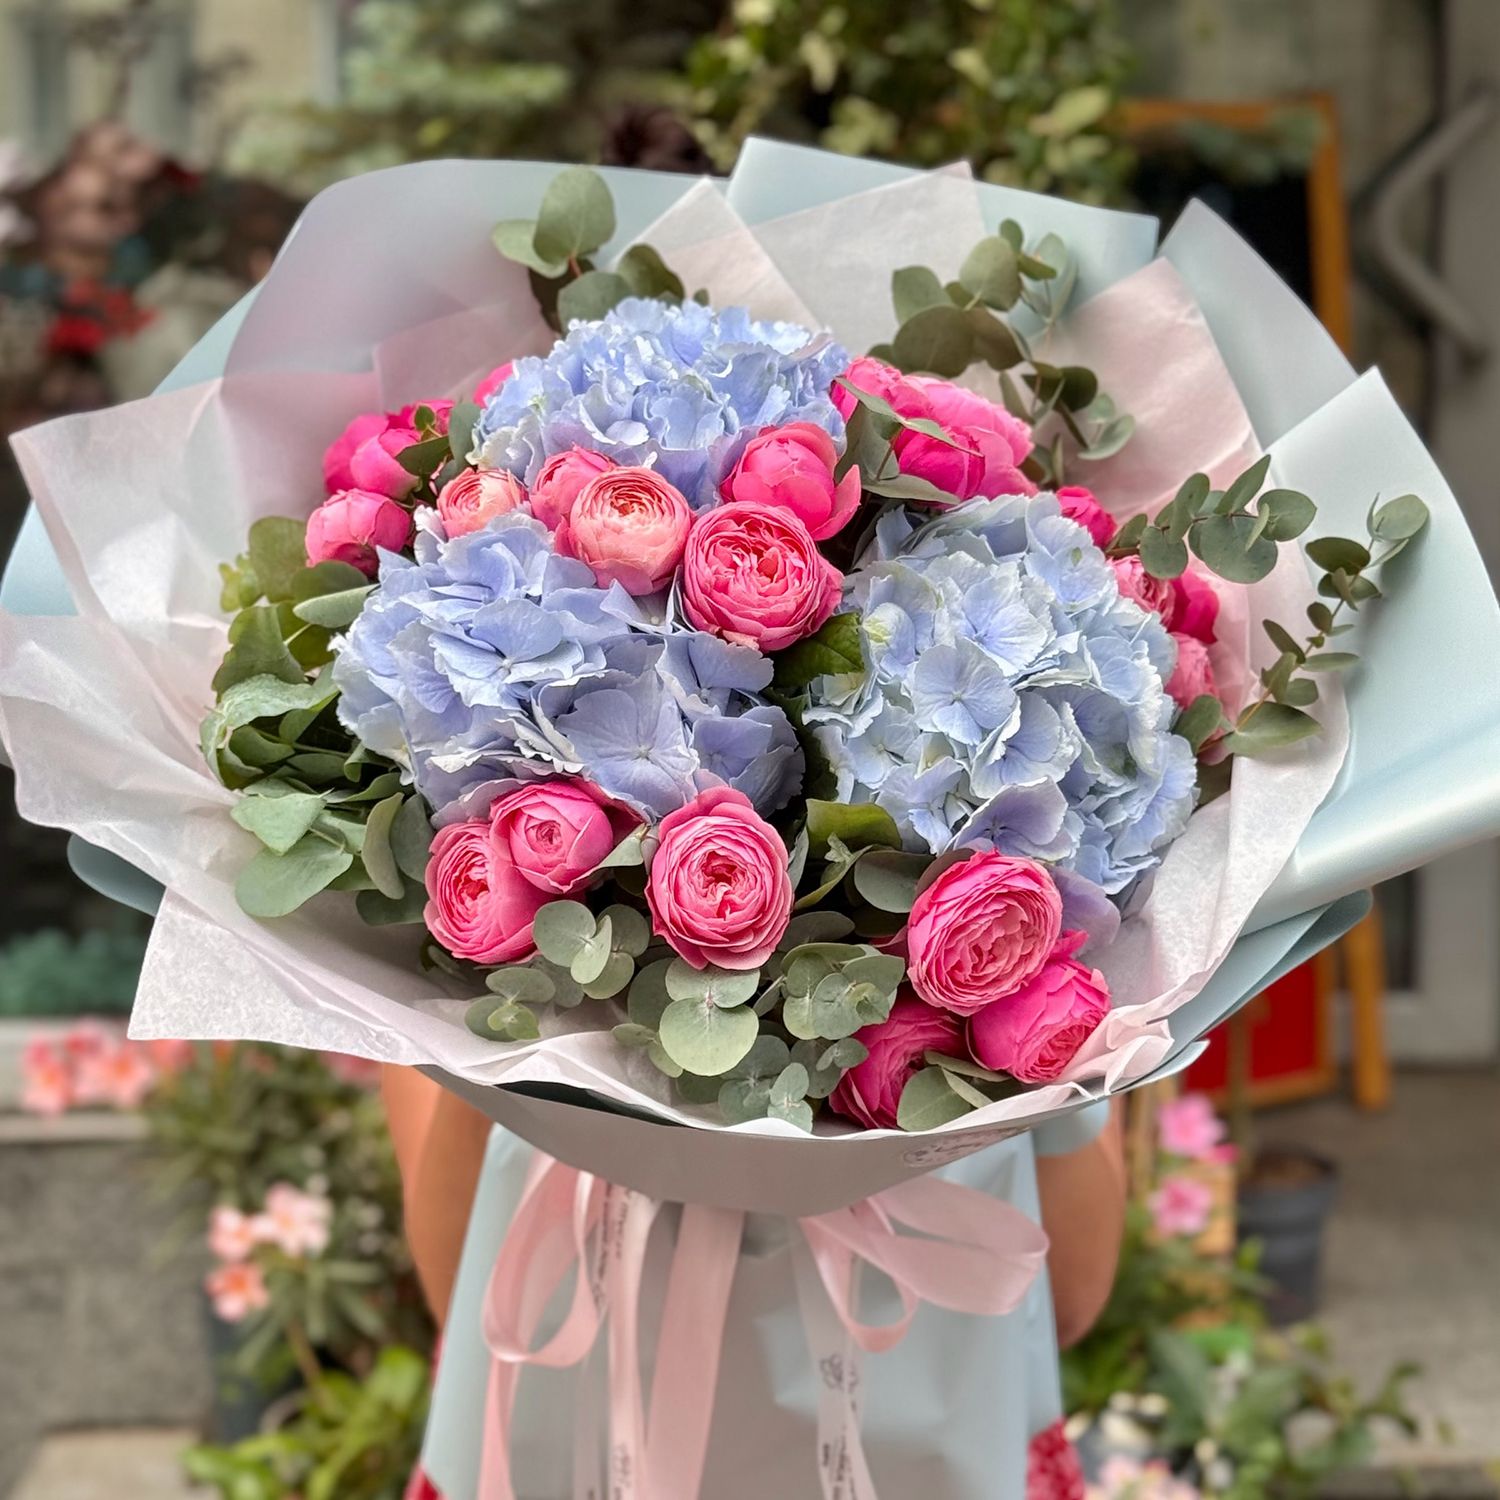 Blue hydrangea and roses